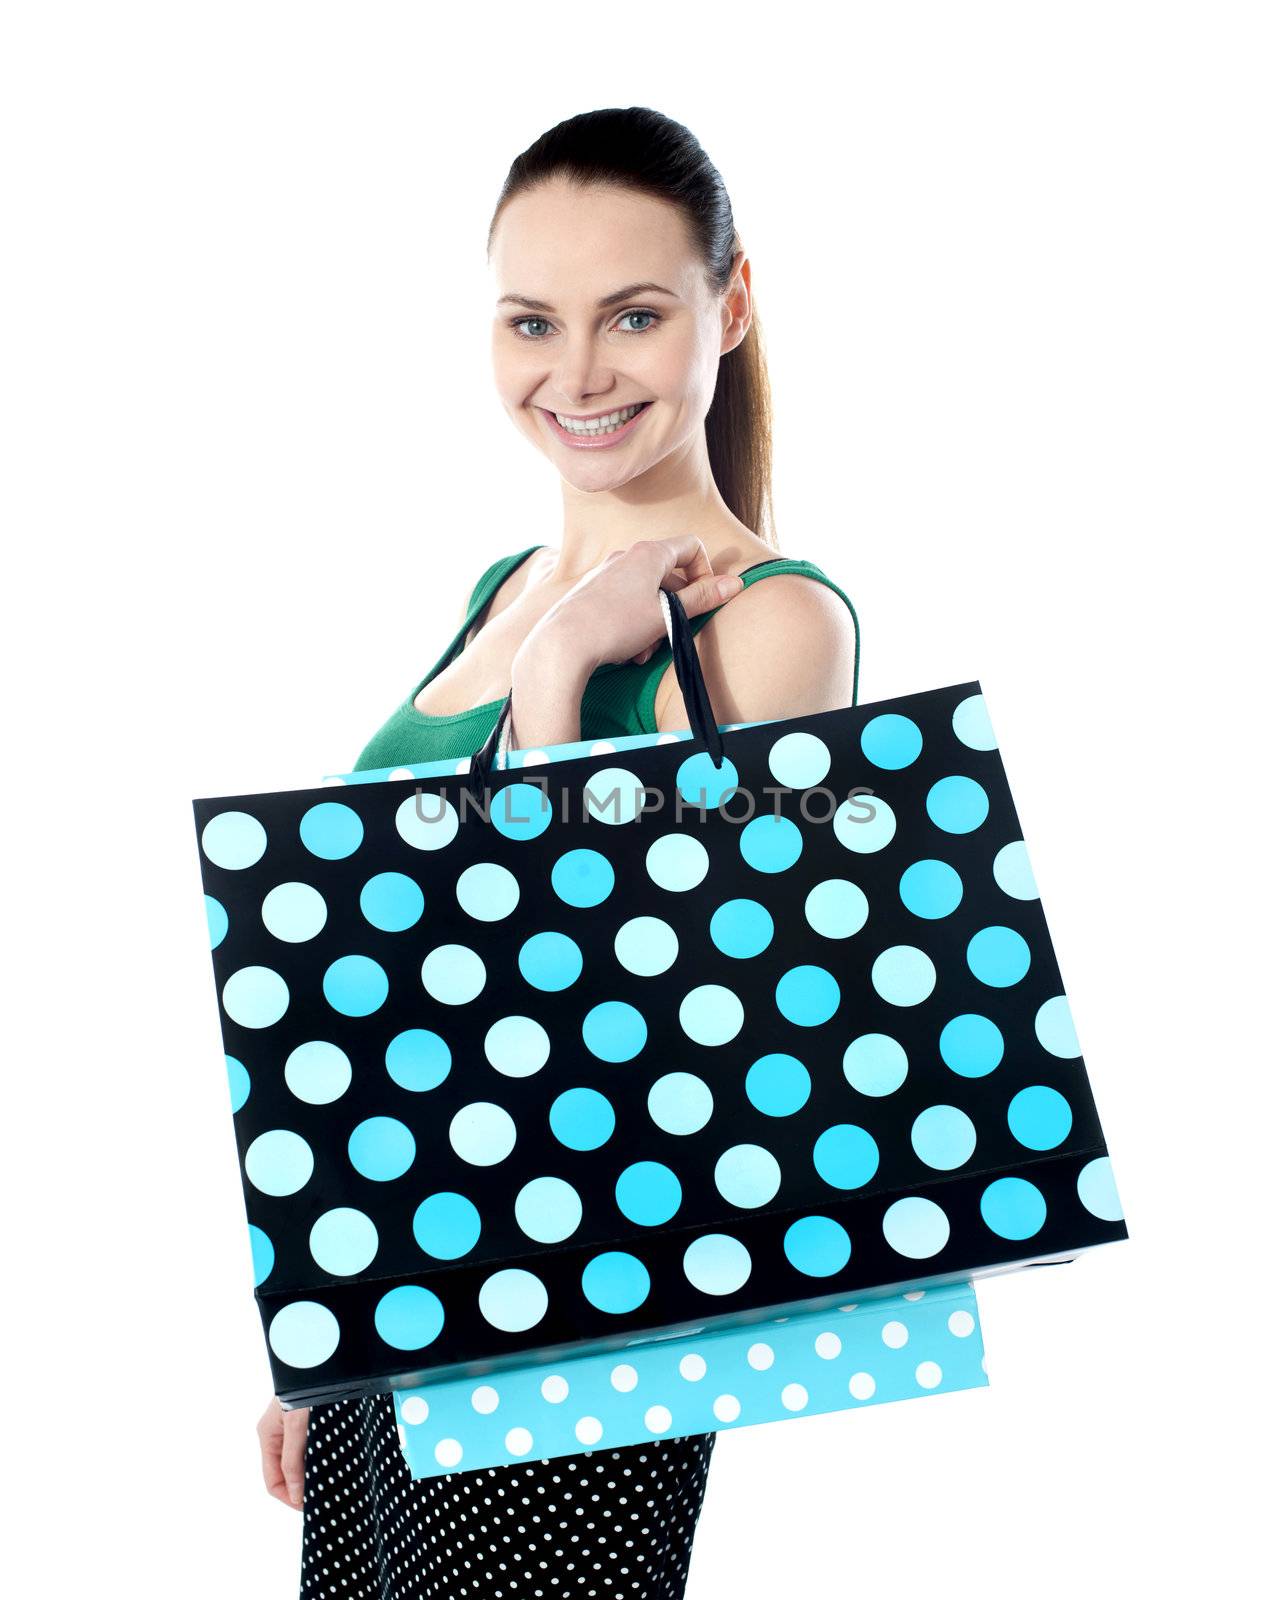 Glamorous smiling teenager shopping. Holding dotted bags